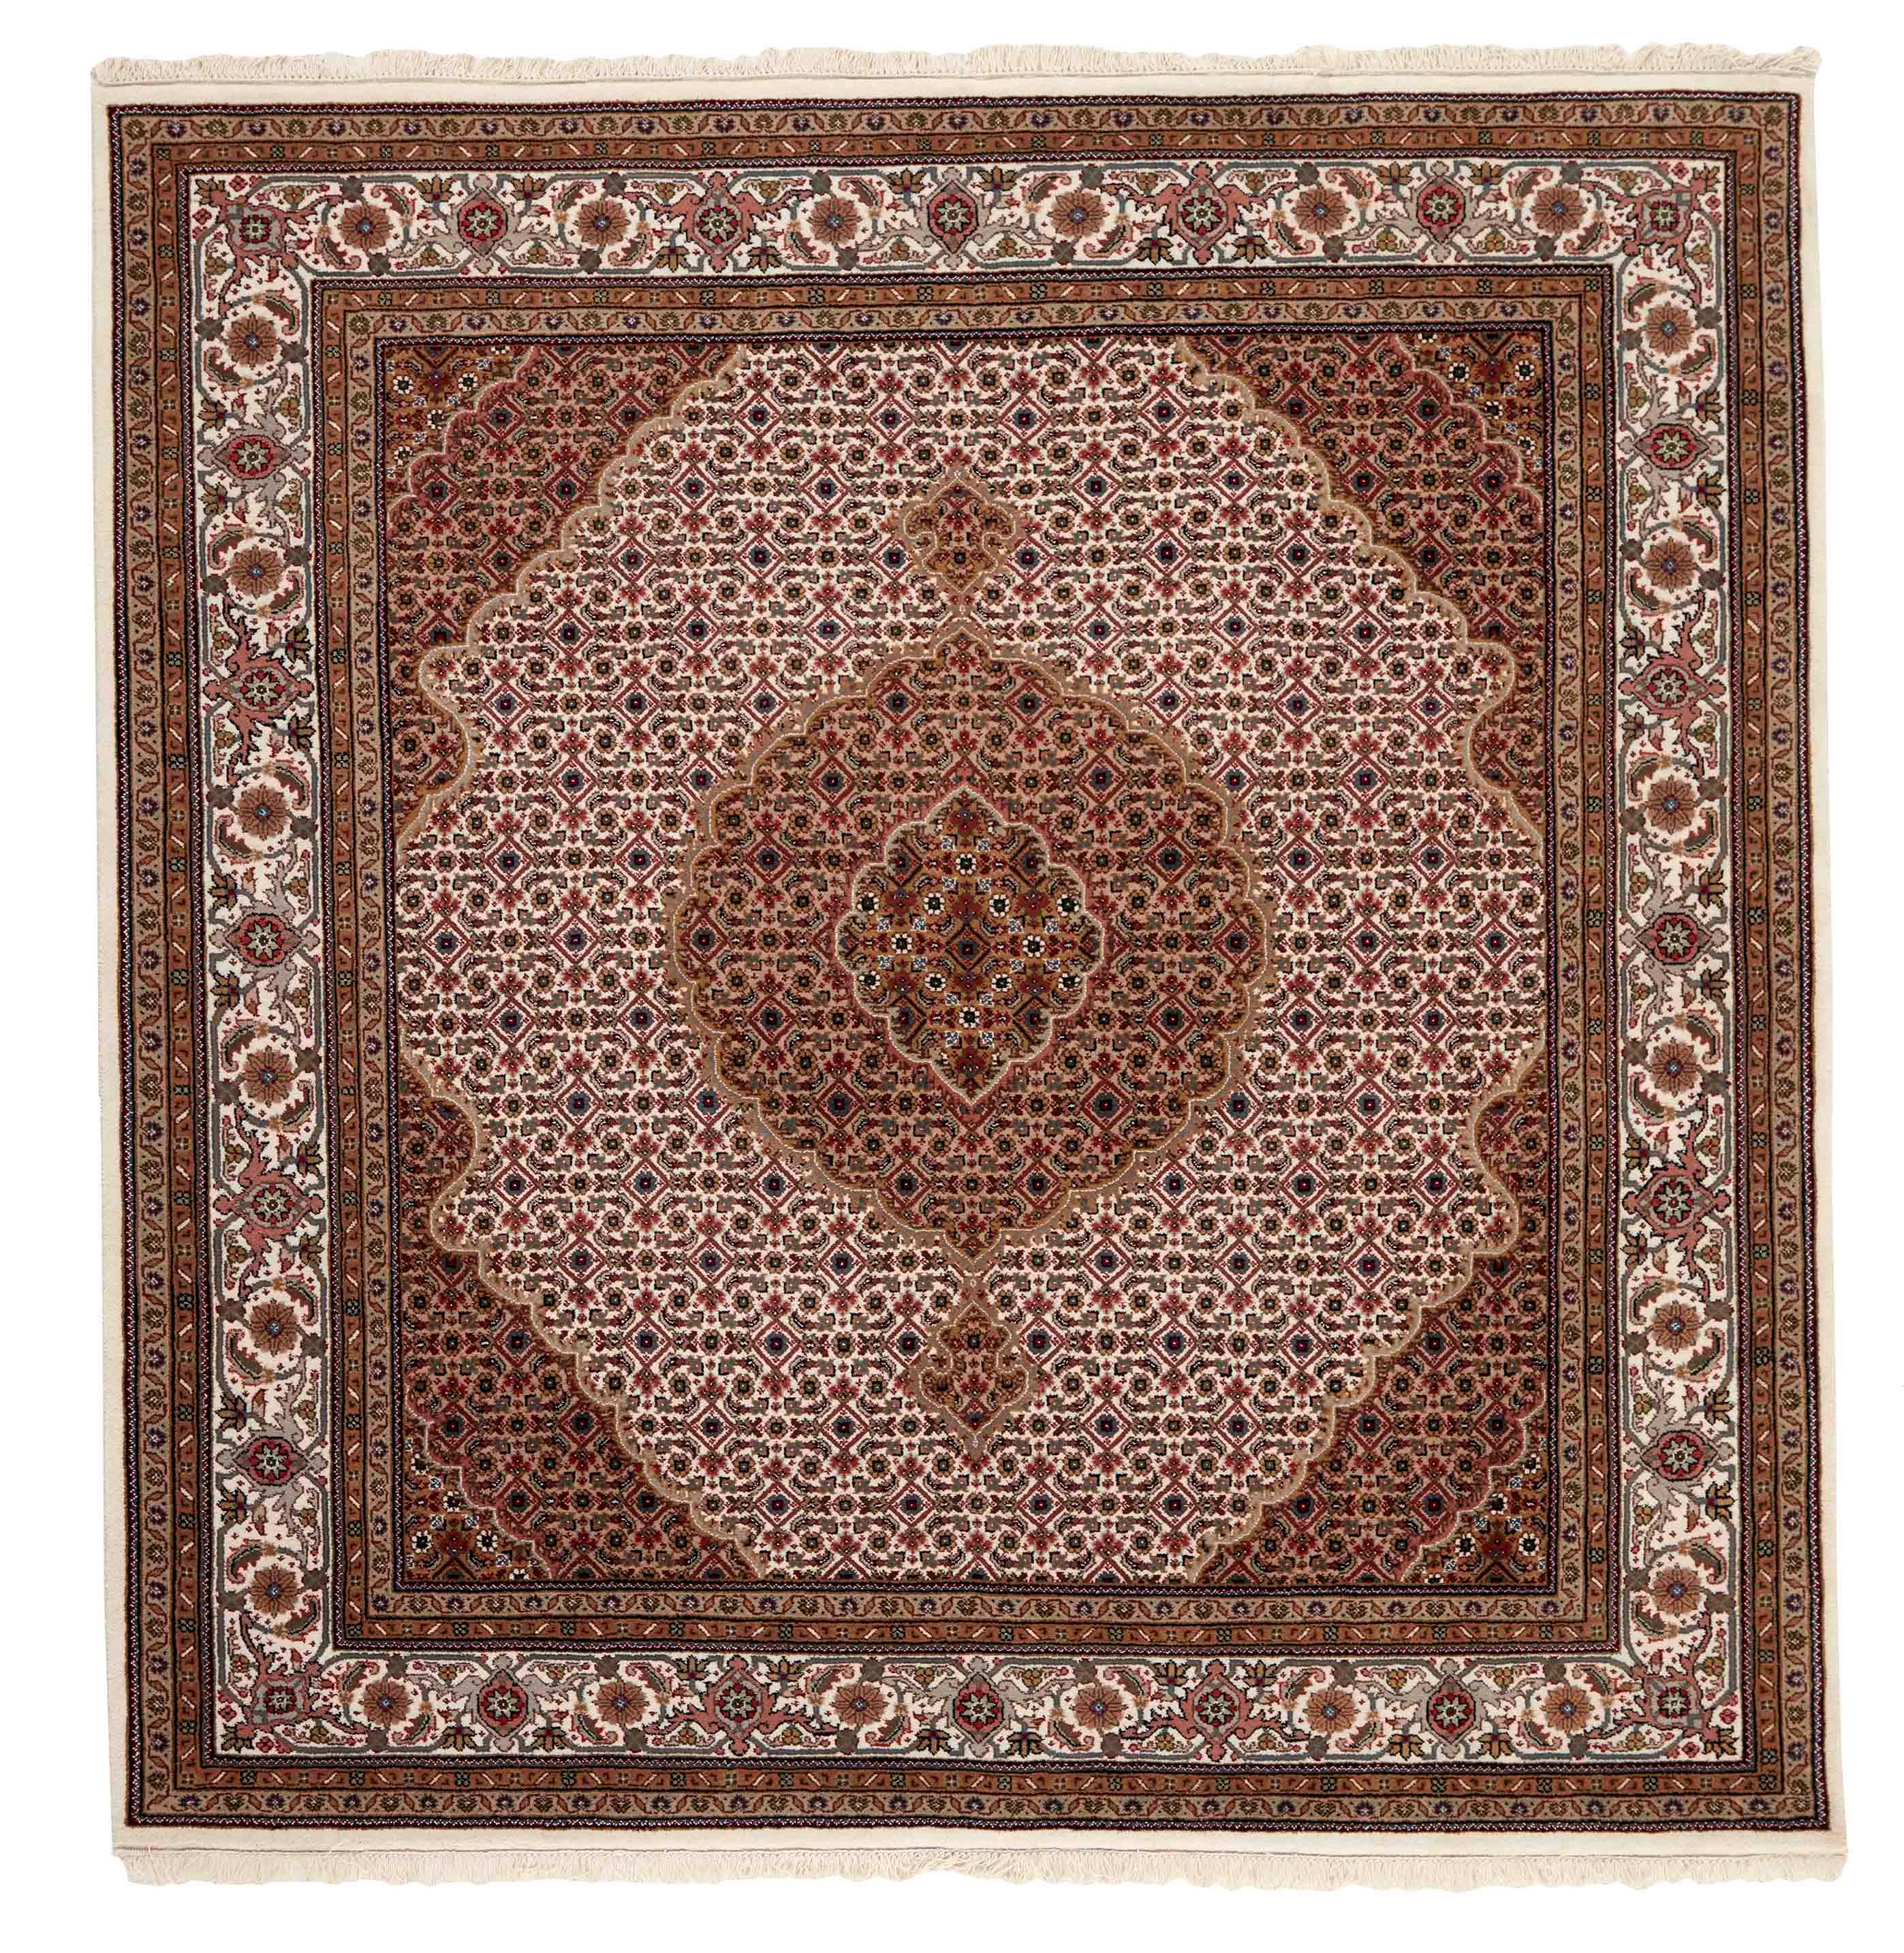 authentic oriental rug with traditional geometric and floral design in red, beige, brown and black